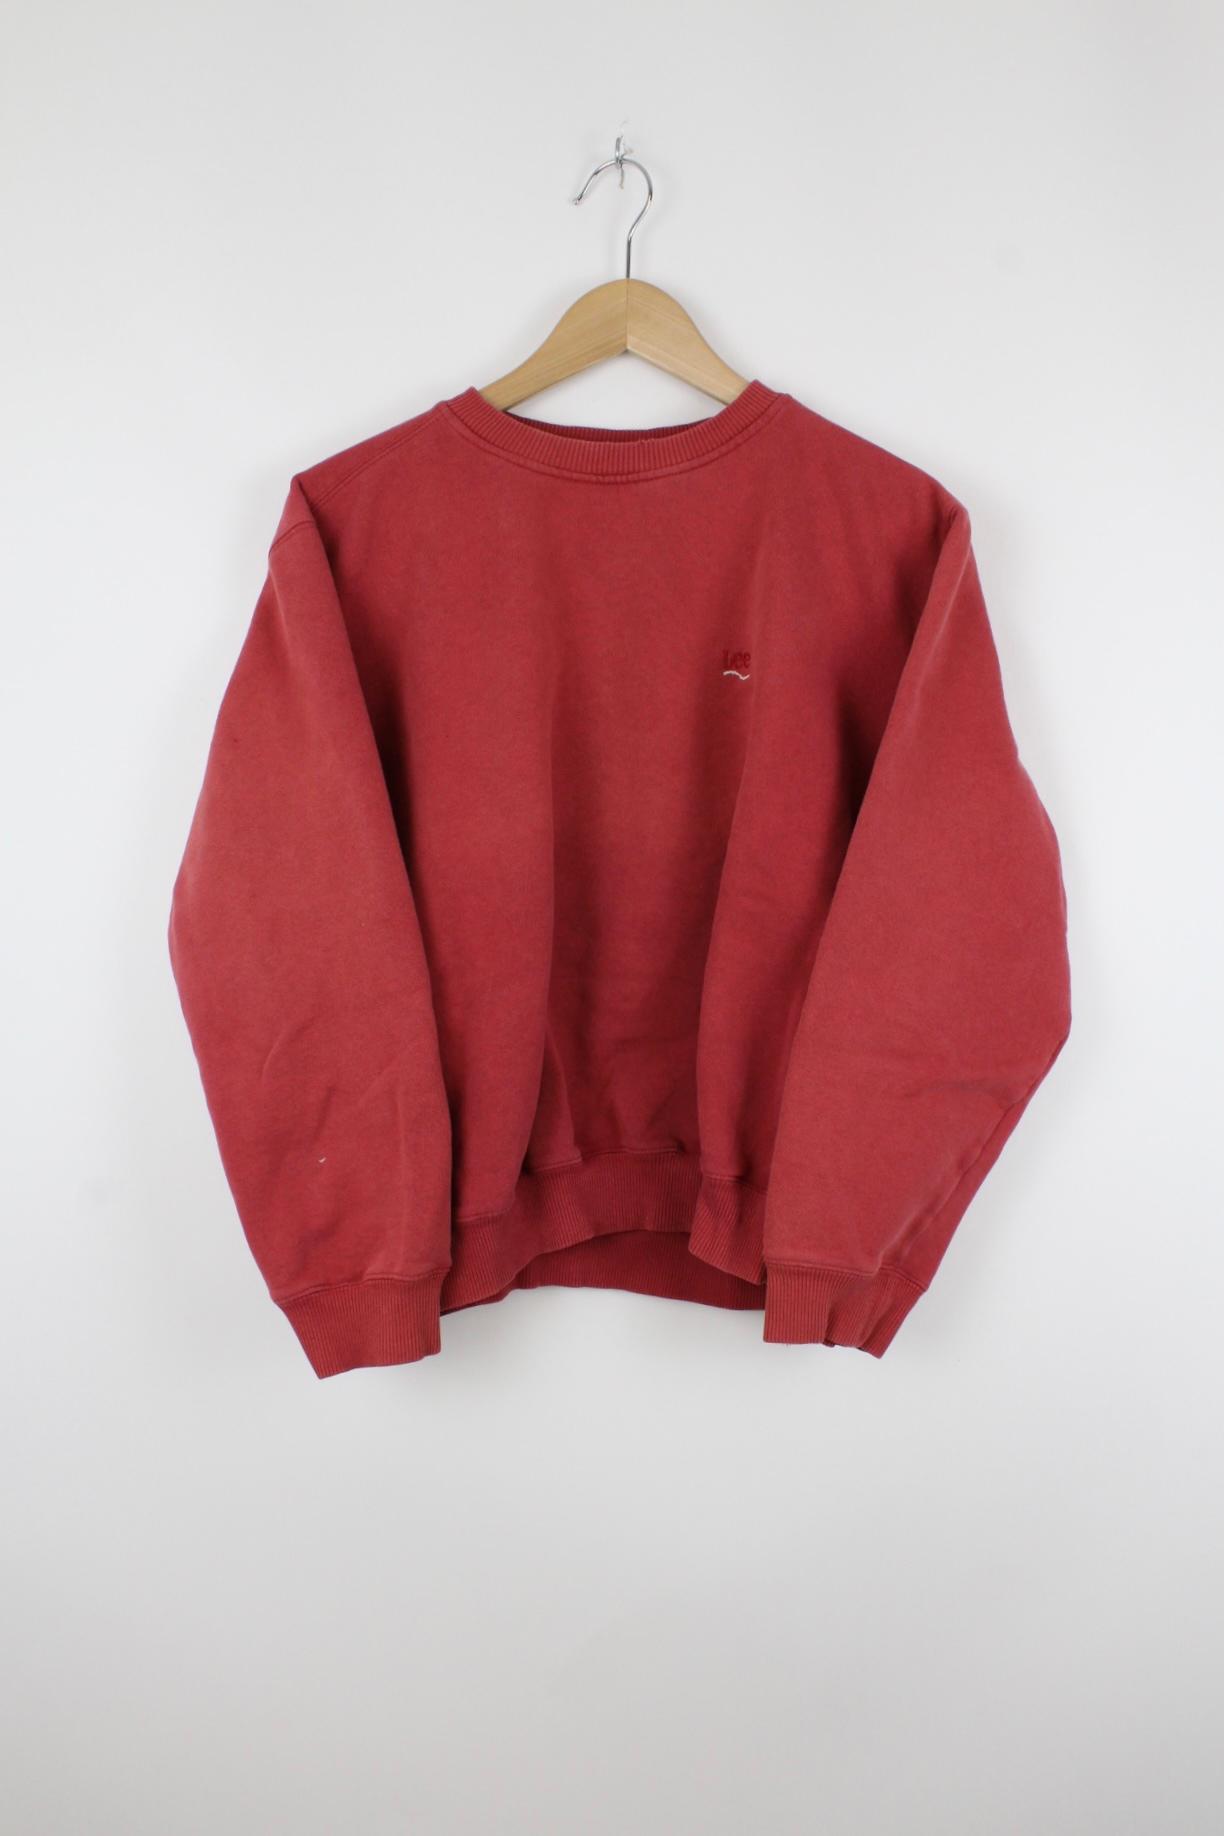 Vintage Lee Sweater Rot - S